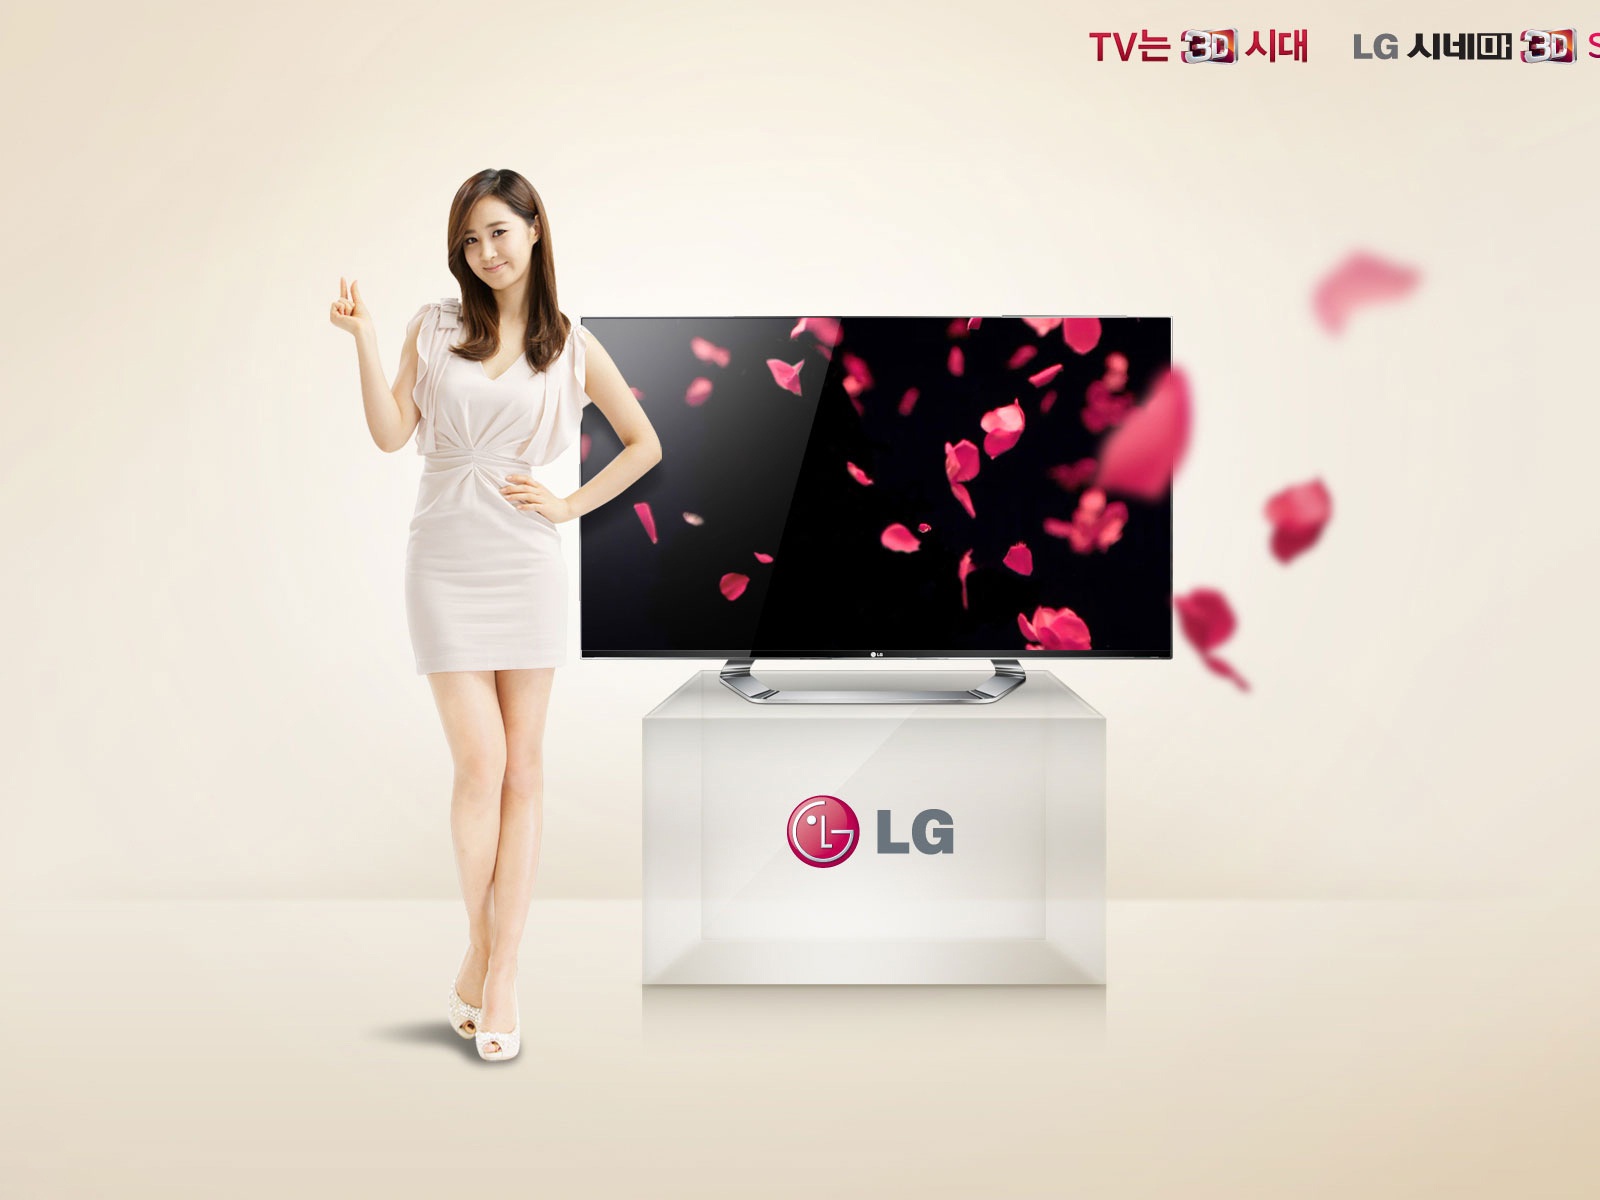 Girls Generation ACE and LG endorsements ads HD wallpapers #17 - 1600x1200